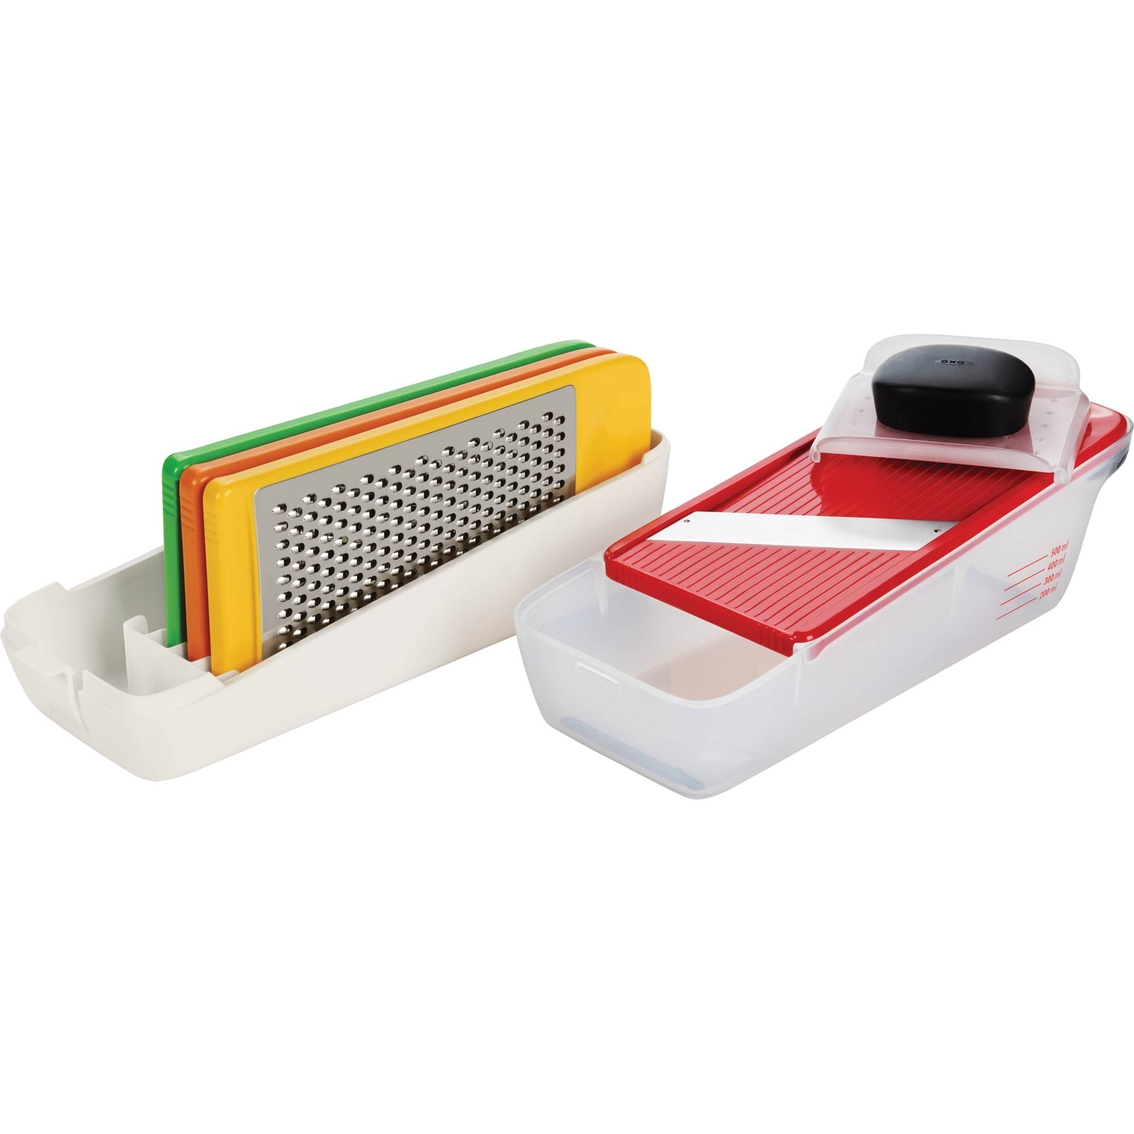 OXO Good Grips Complete Grate and Slice Set - Image 2 of 3